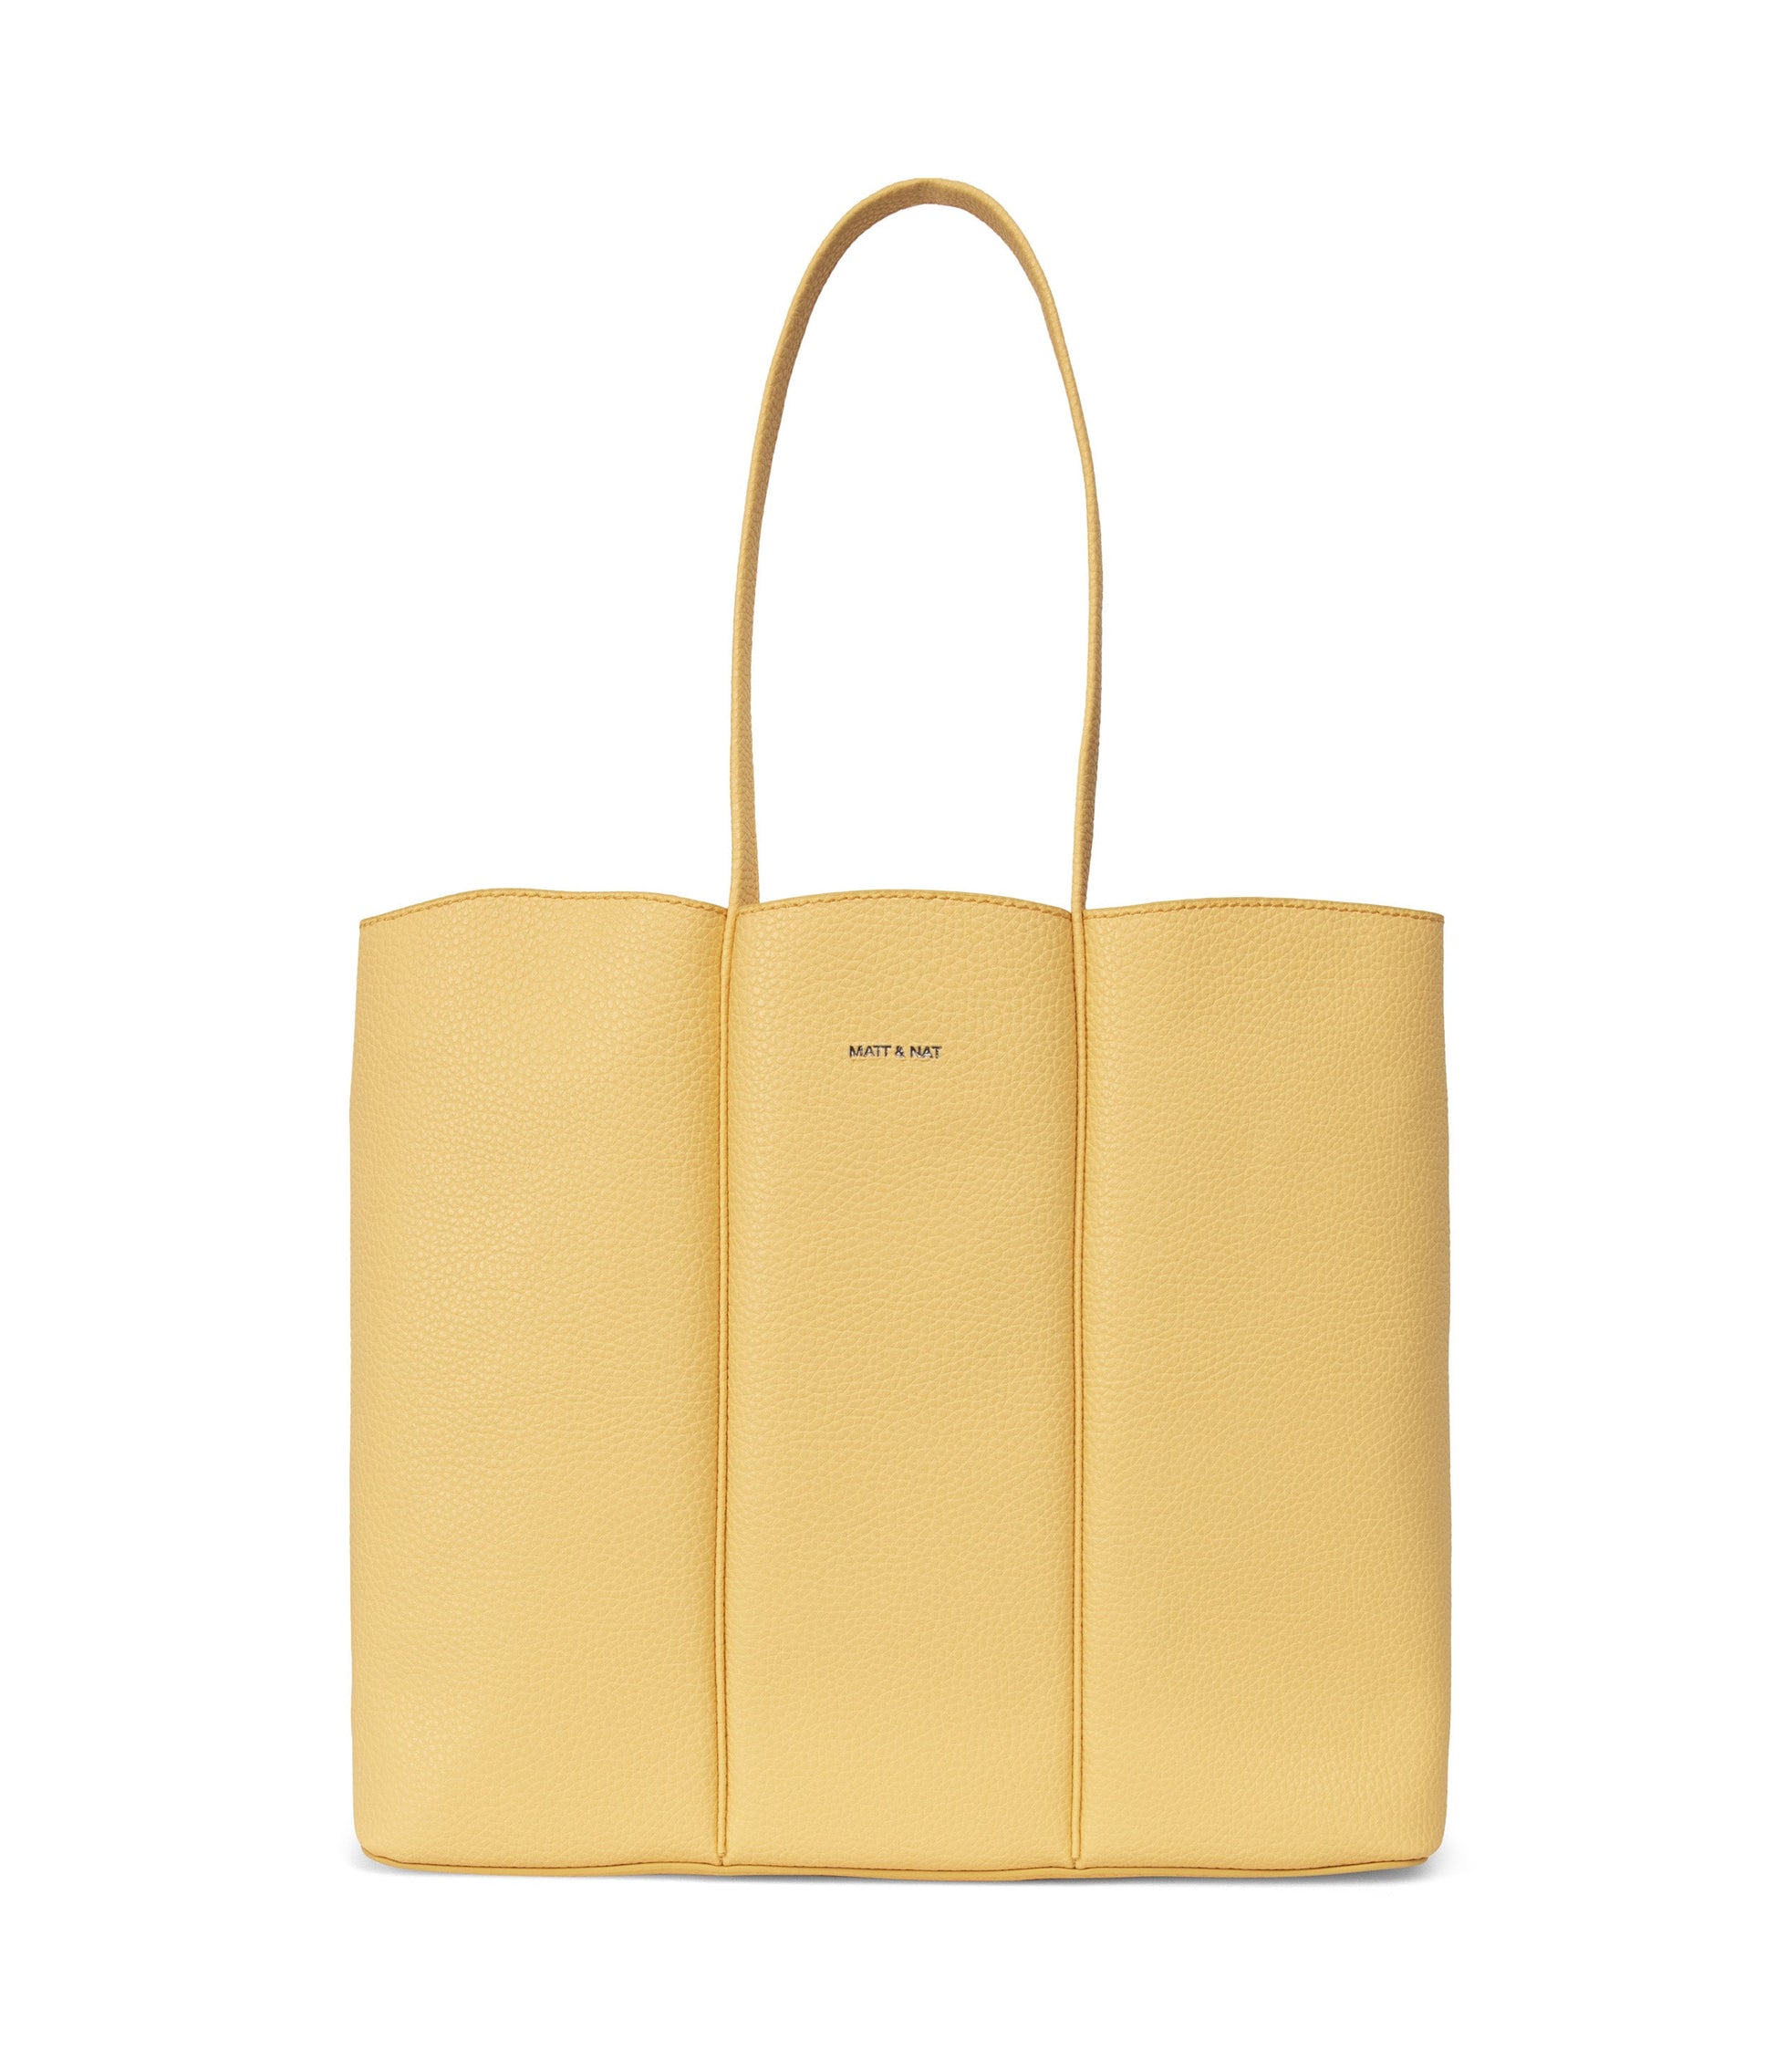 HYDE Vegan Tote Bag - Purity | Color: Yellow - variant::zest